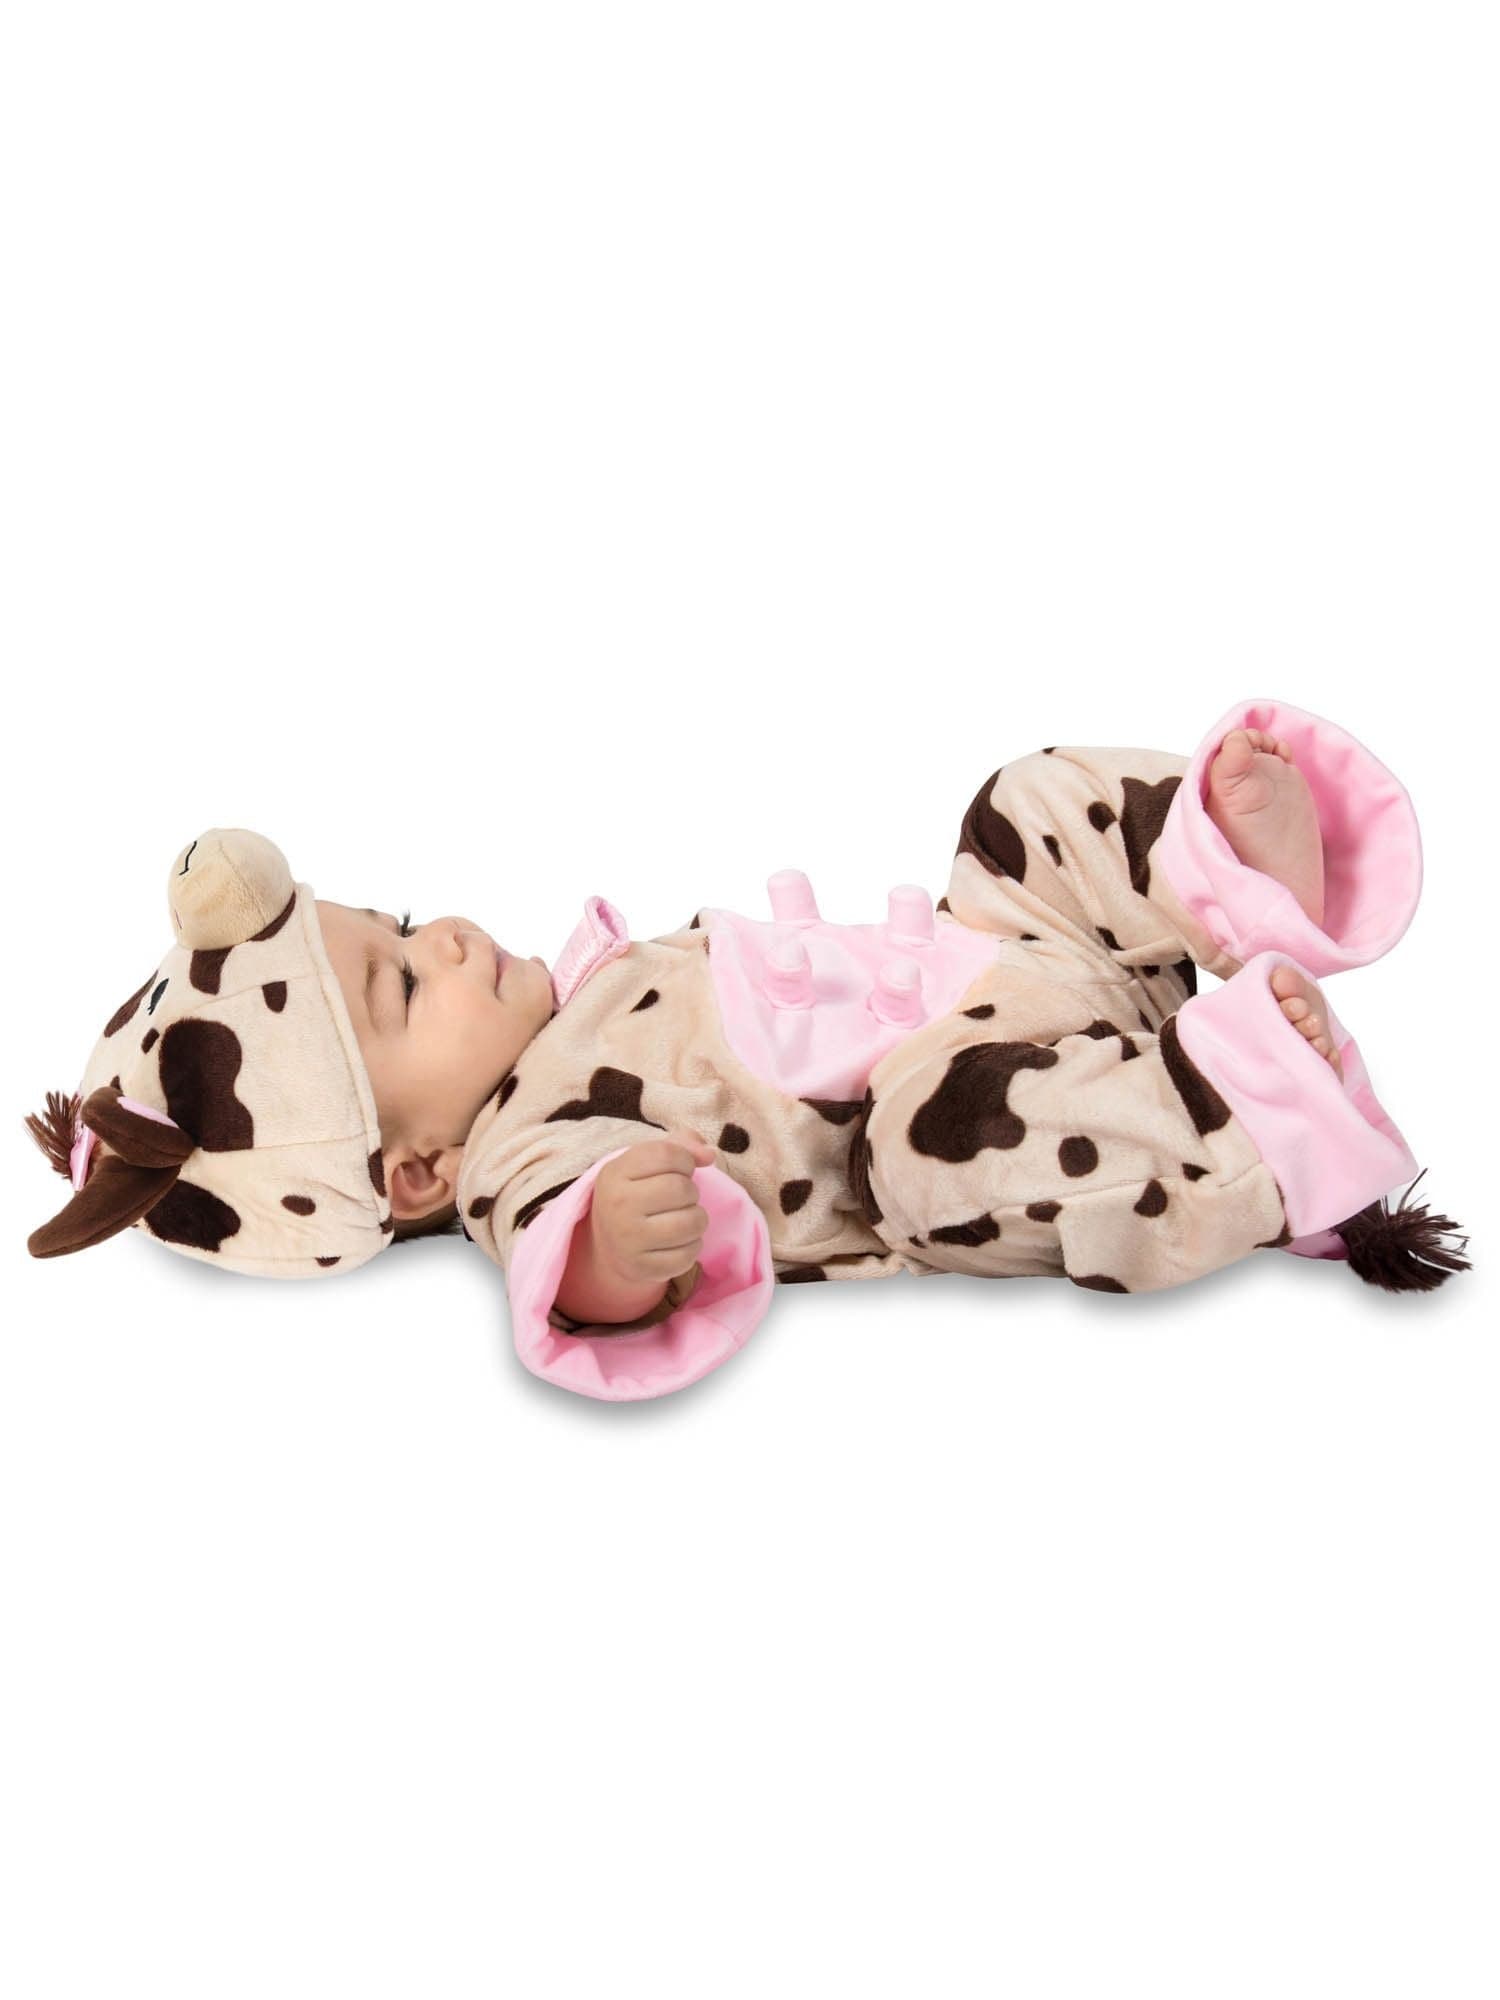 Brown and Pink Sleepy Cow Costume for Babies - costumes.com